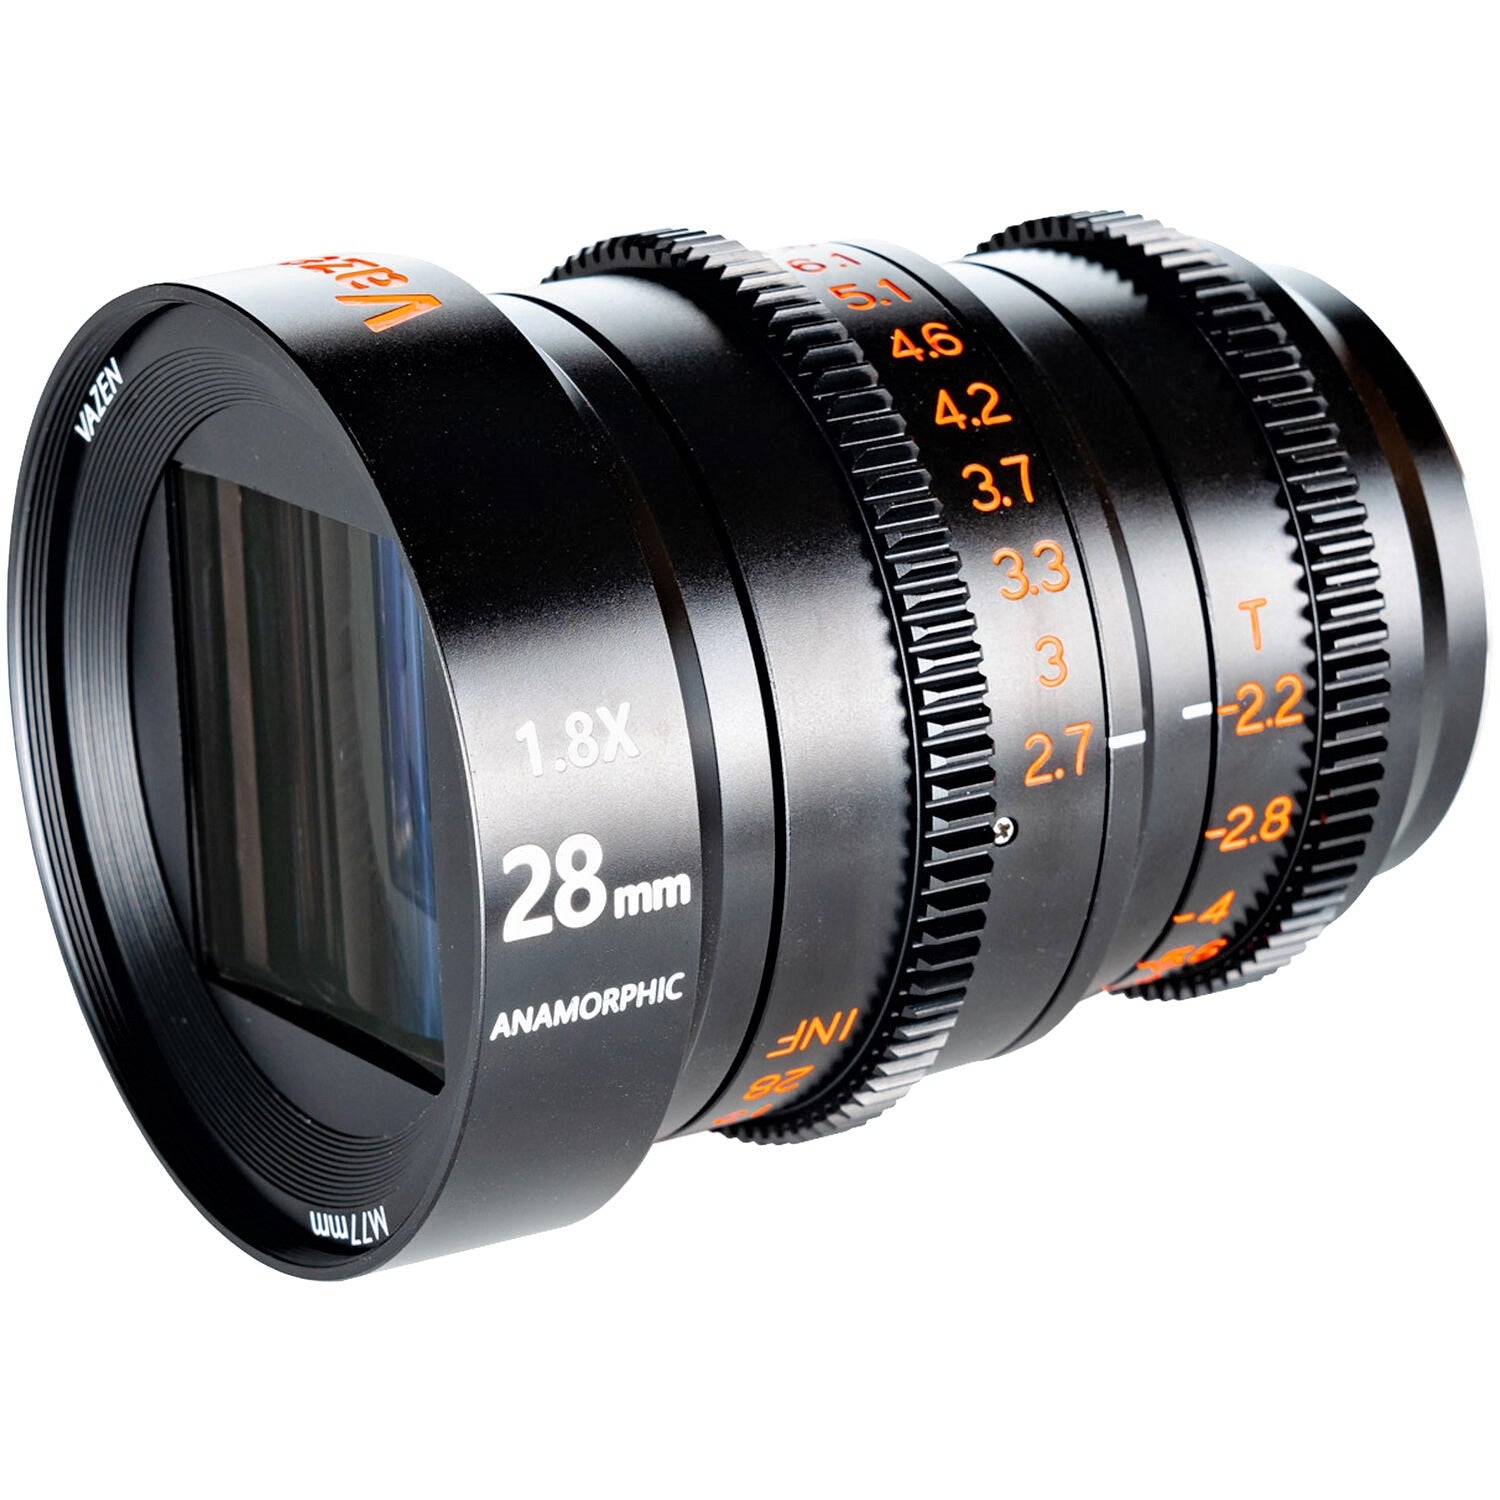 Vazen 28mm T/2.2 1.8X Anamorphic Lens (MFT, Amber Flare) in a Front-Side View